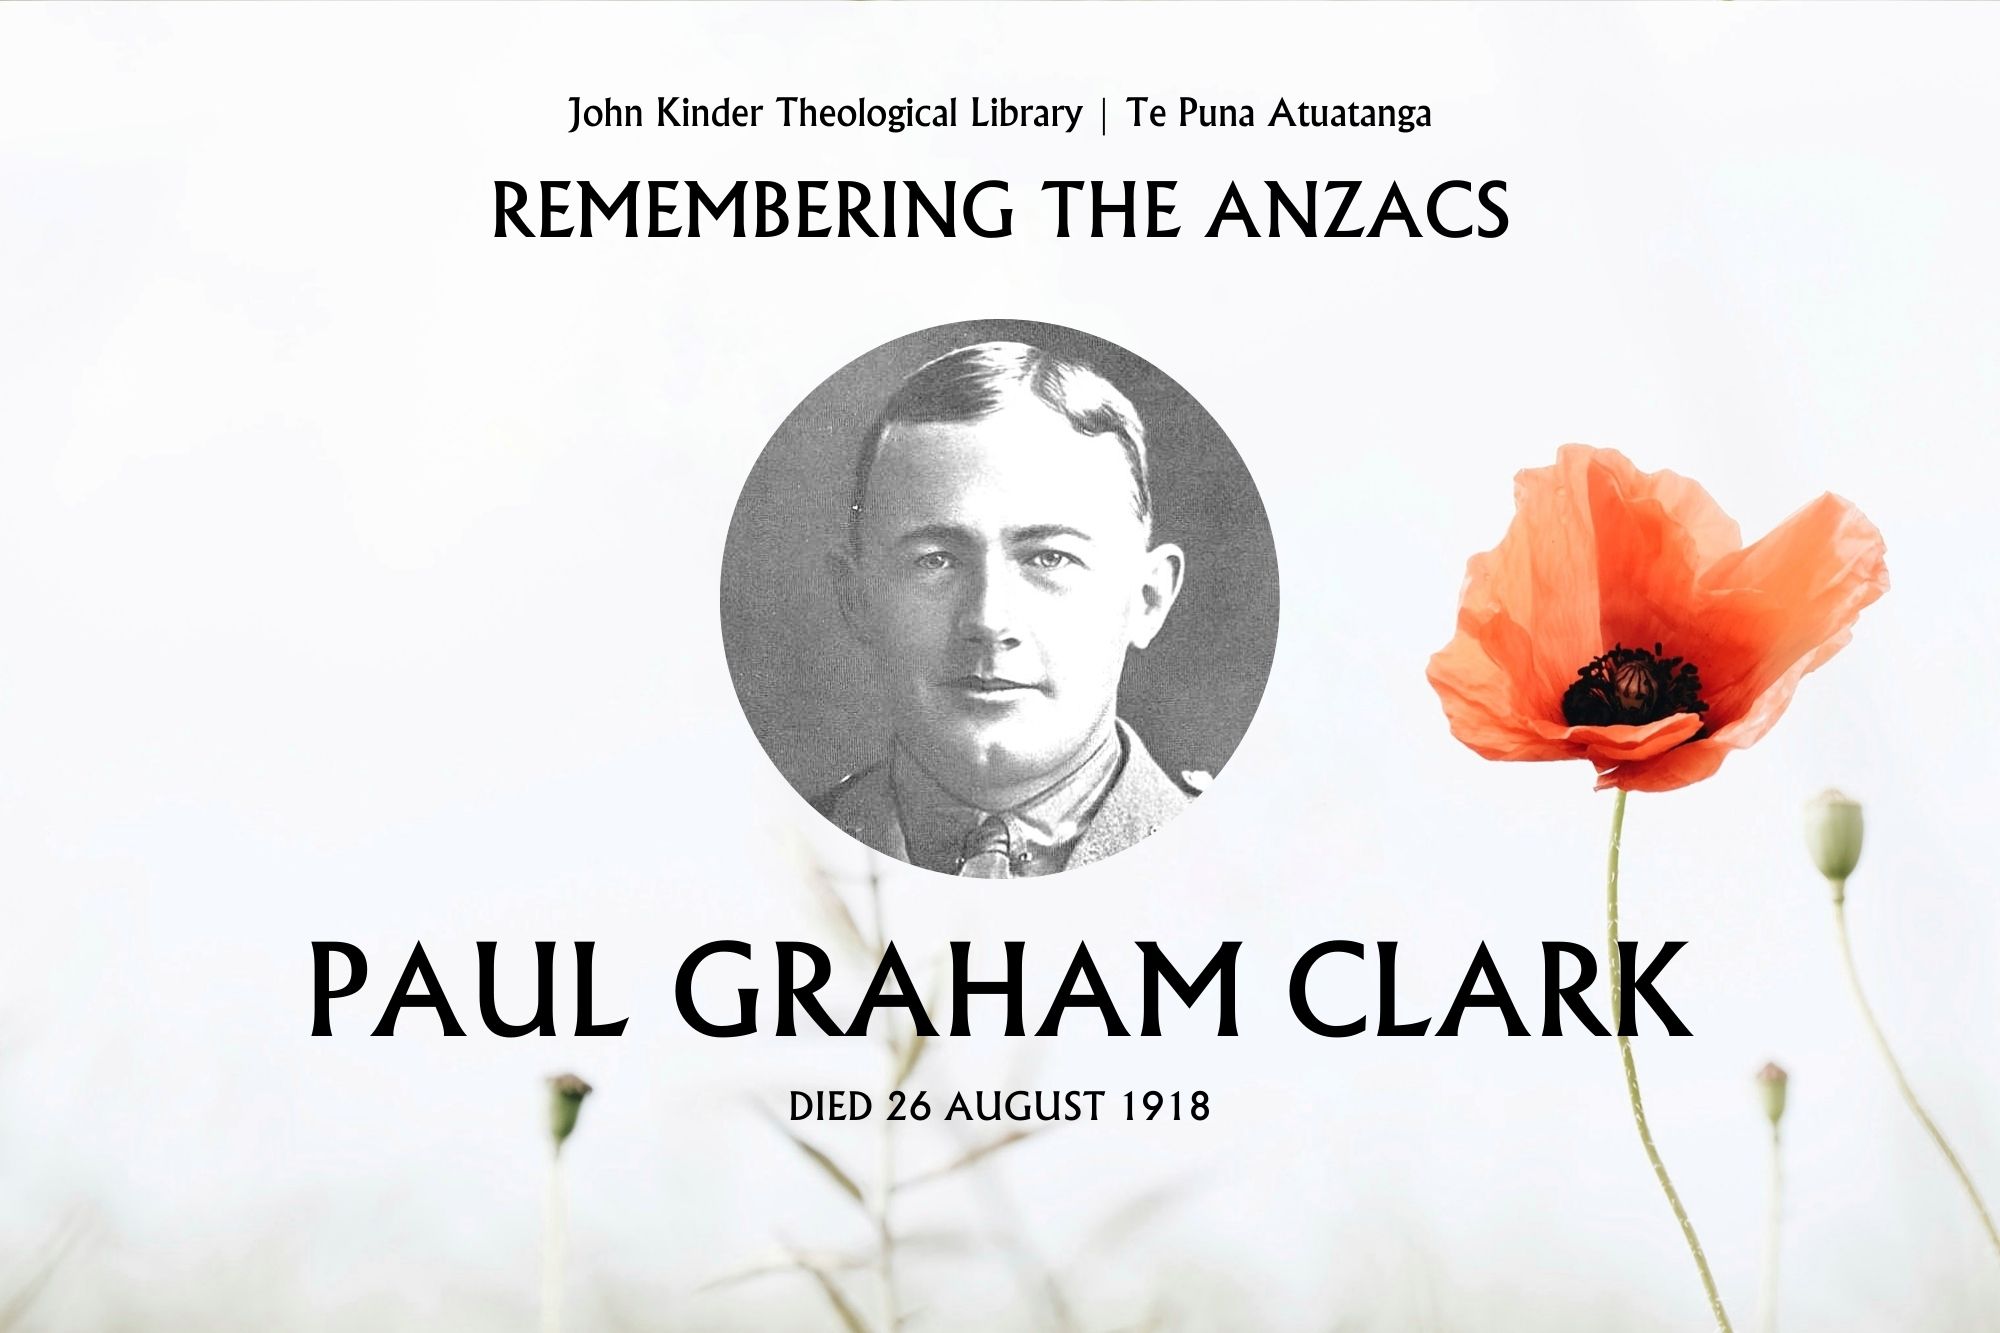 Remembering the ANZACs - John Kinder Theological Library - St John's College - Paul Graham Clark